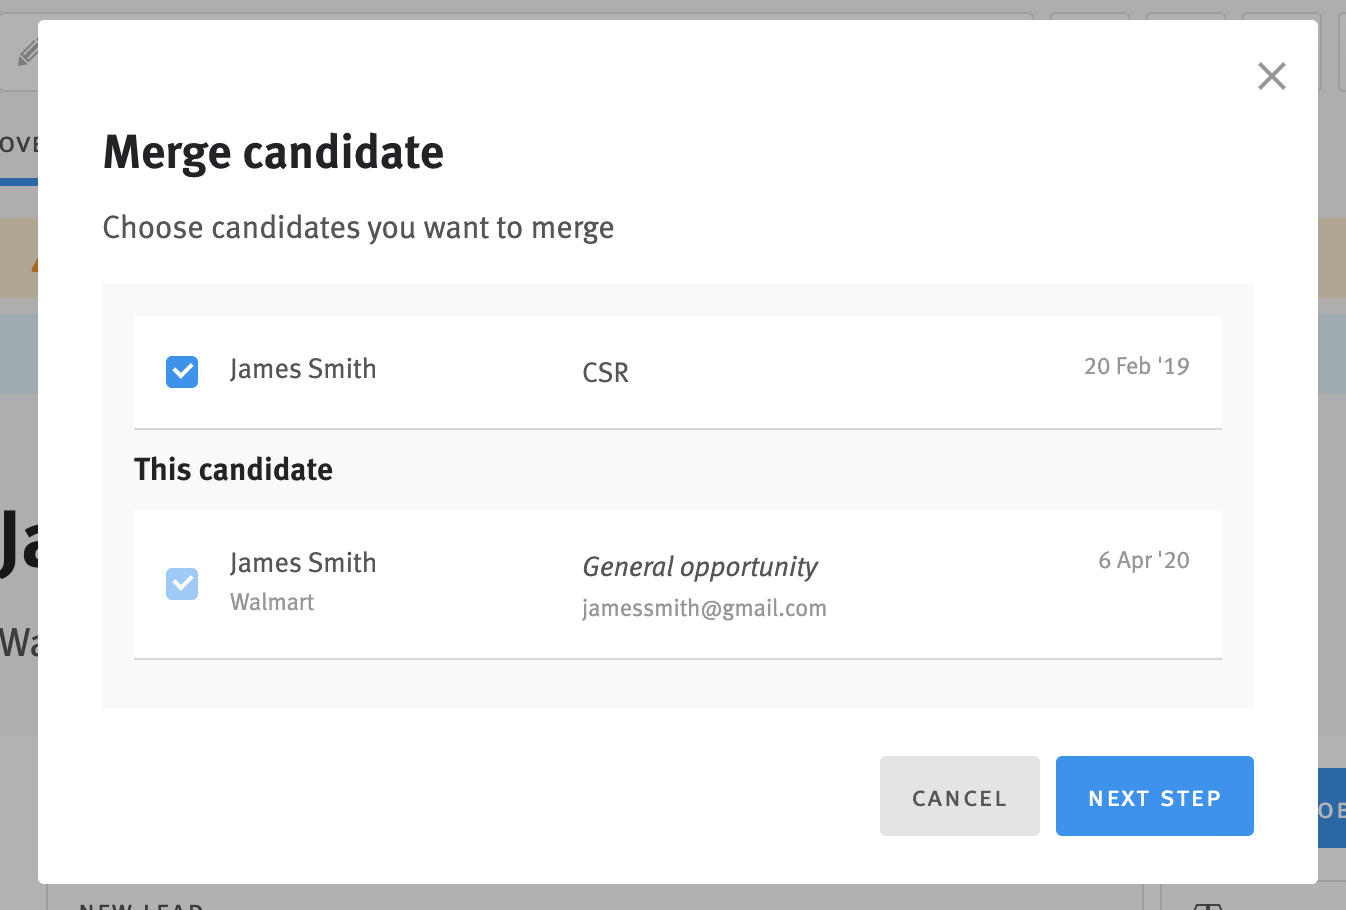 Merge candidates modal with two candidate profiles selected.